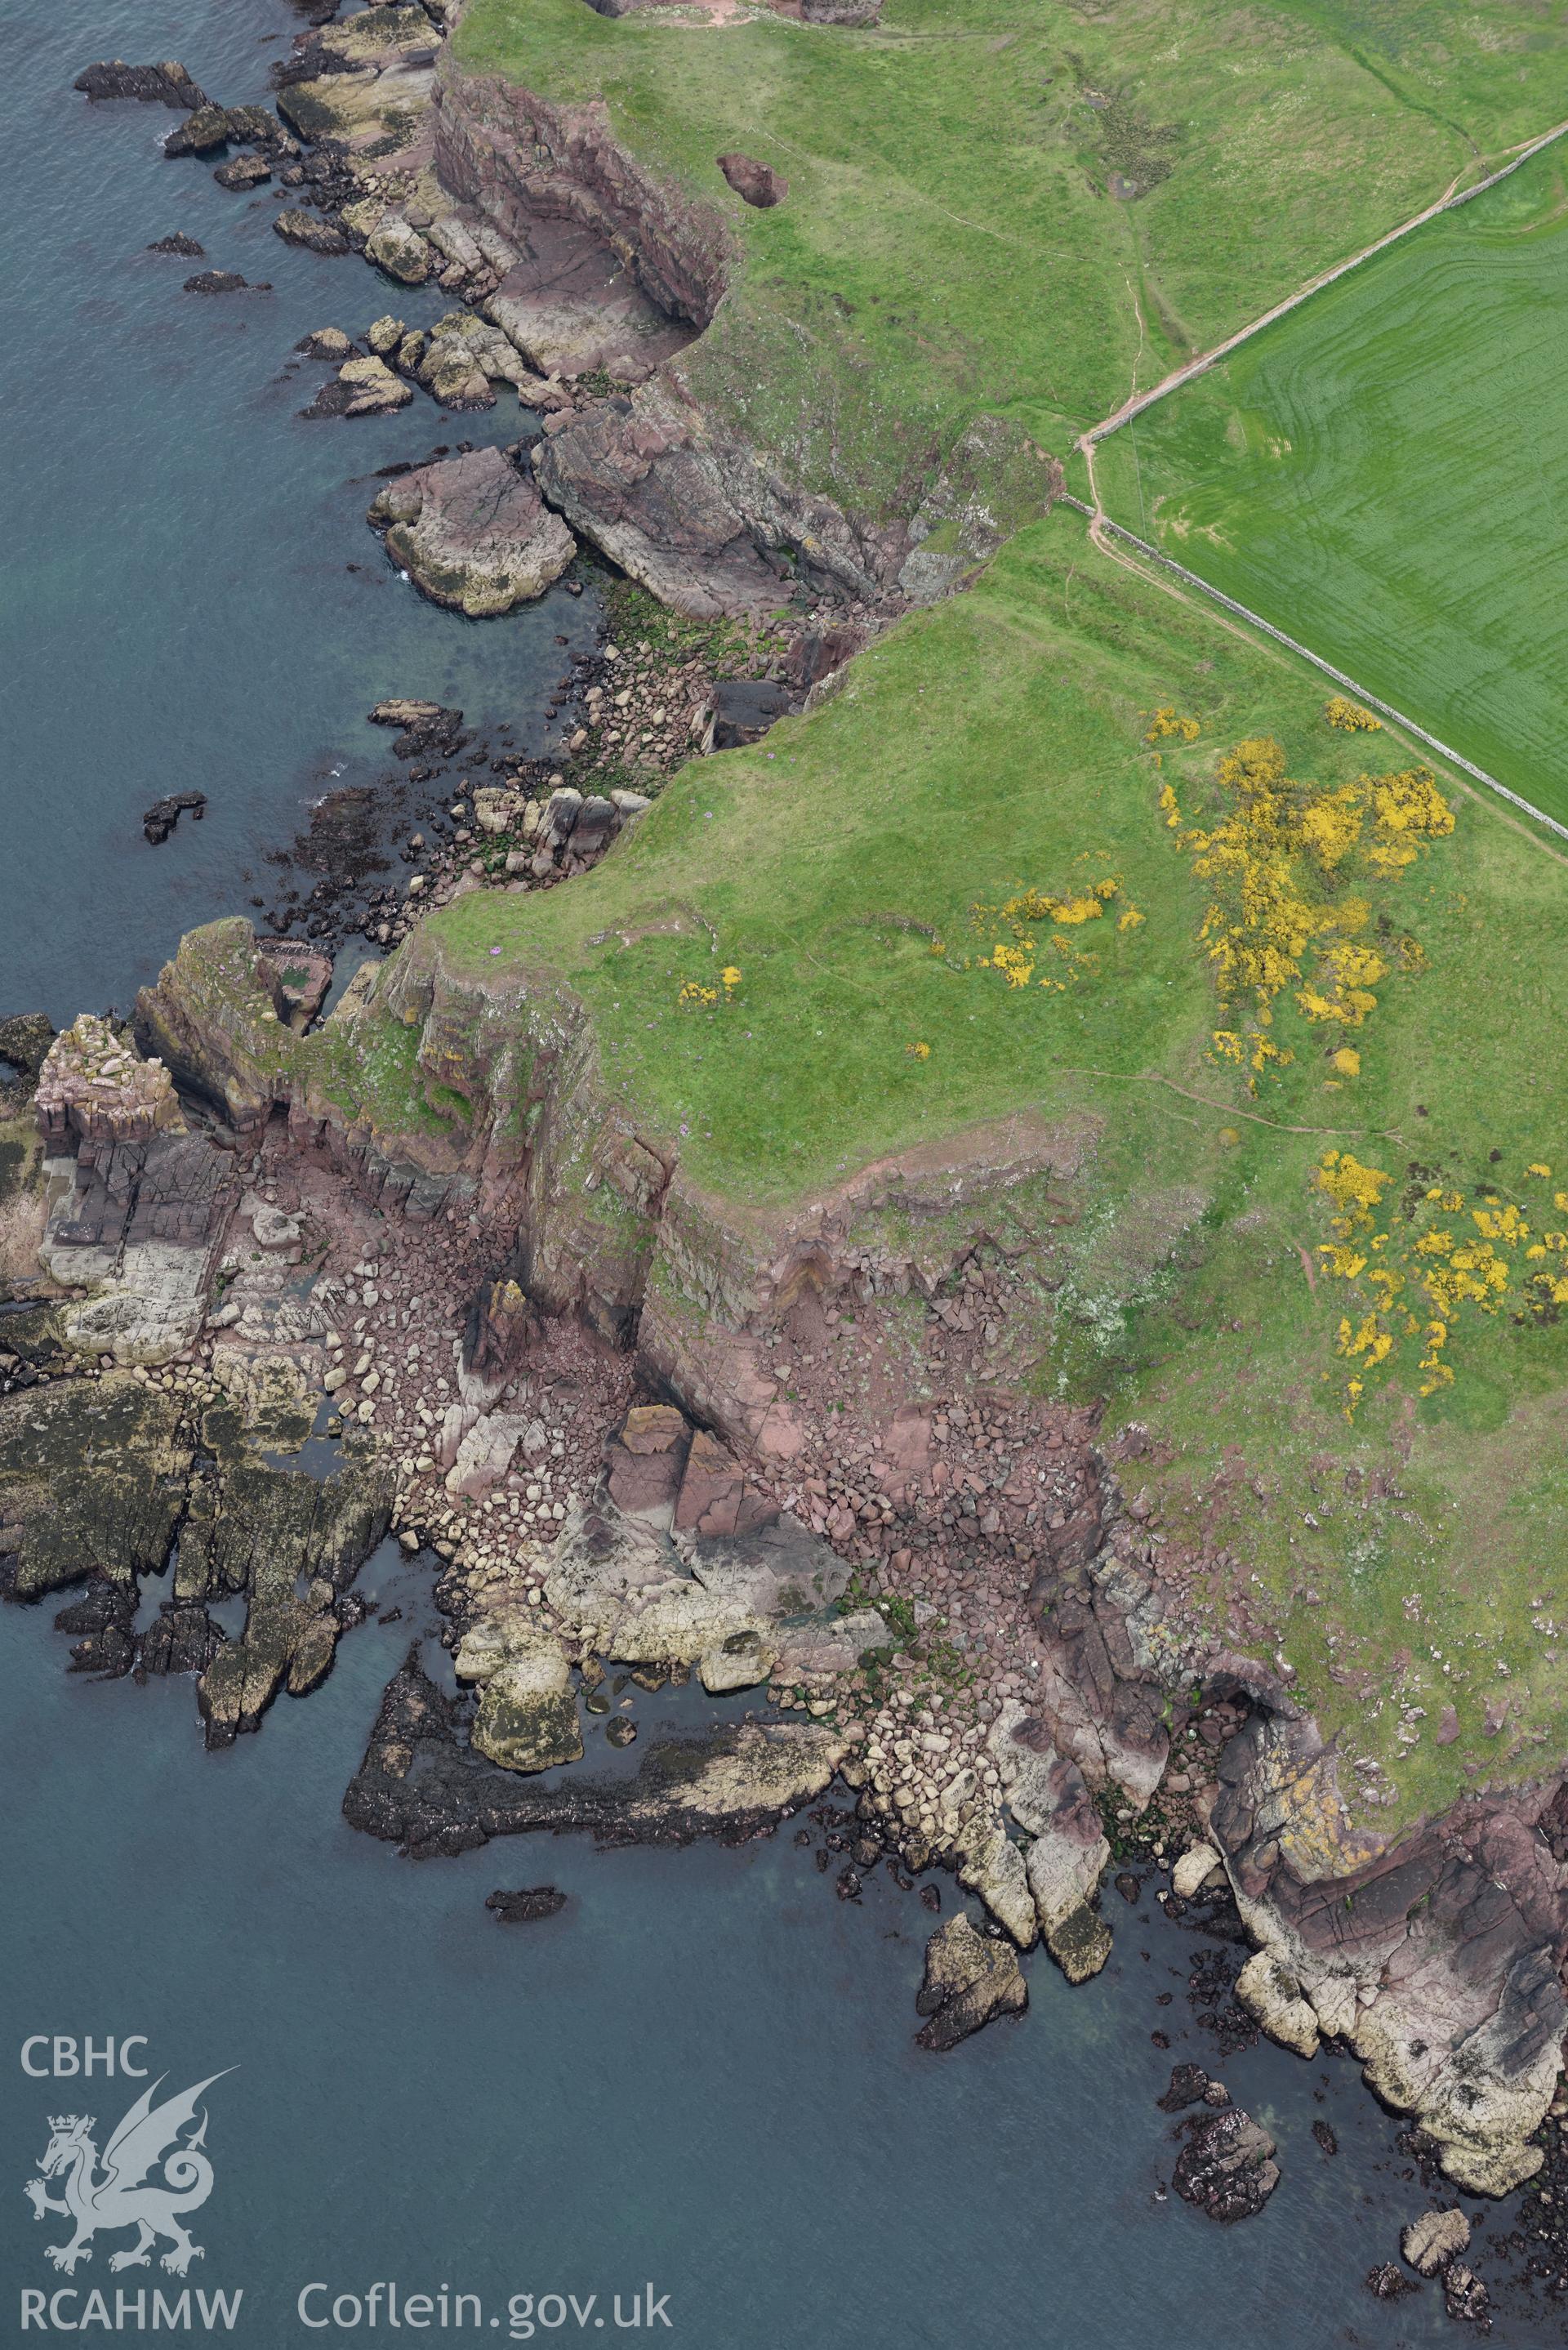 Tower Point Rath. Baseline aerial reconnaissance survey for the CHERISH Project. ? Crown: CHERISH PROJECT 2017. Produced with EU funds through the Ireland Wales Co-operation Programme 2014-2020. All material made freely available through the Open Government Licence.